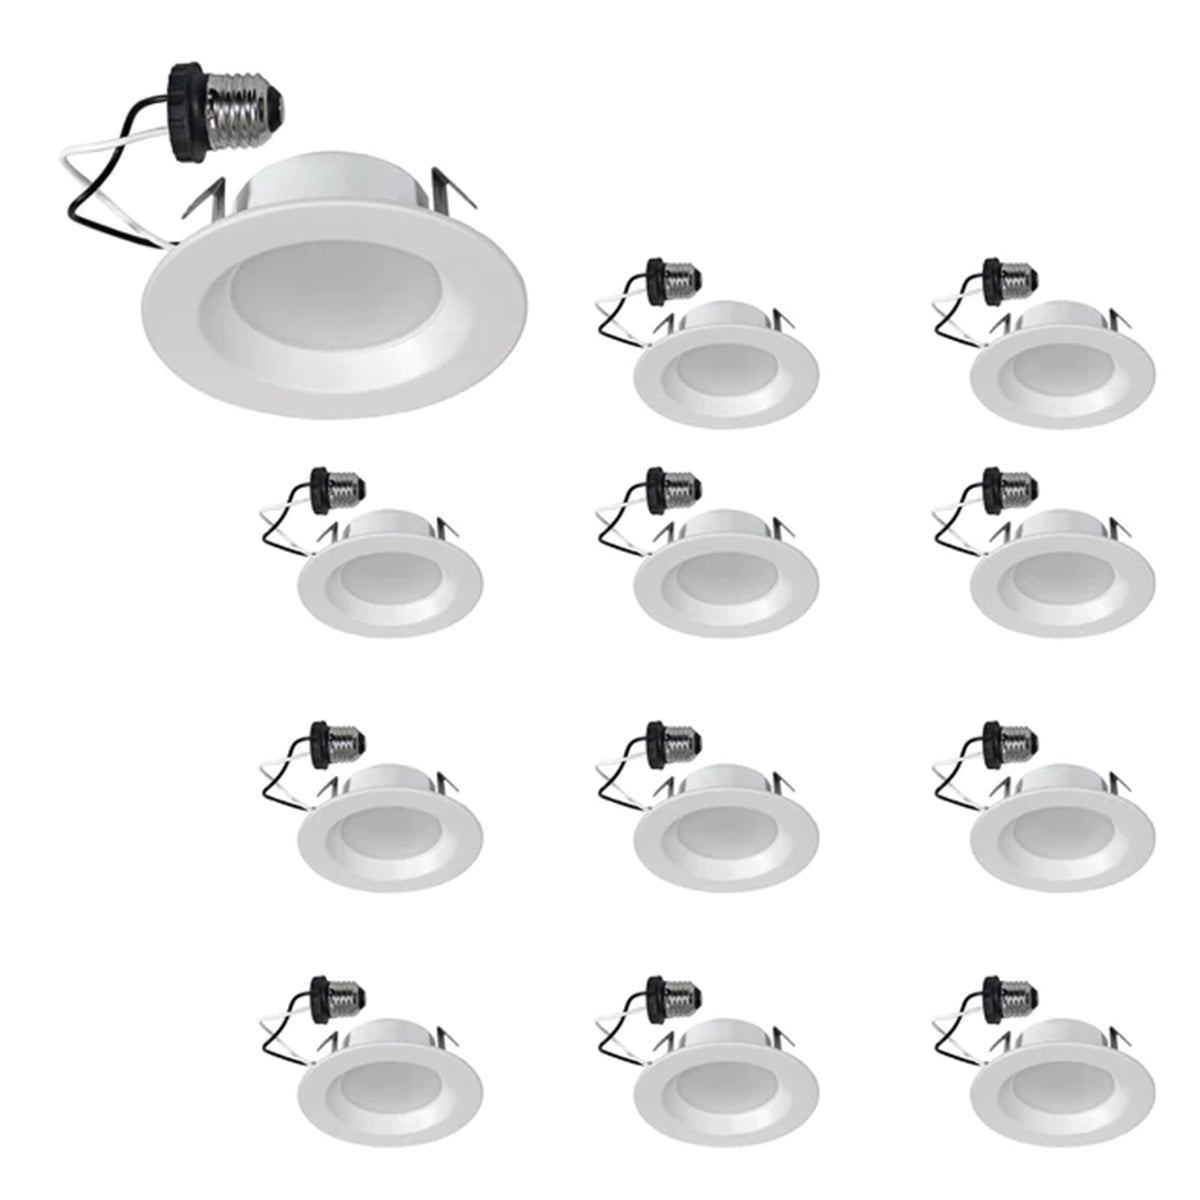 4'' Recessed LED Retrofit Can Light, 50W Equal, 550 Lumens, 3000K, Smooth White Trim (Pack of 12)